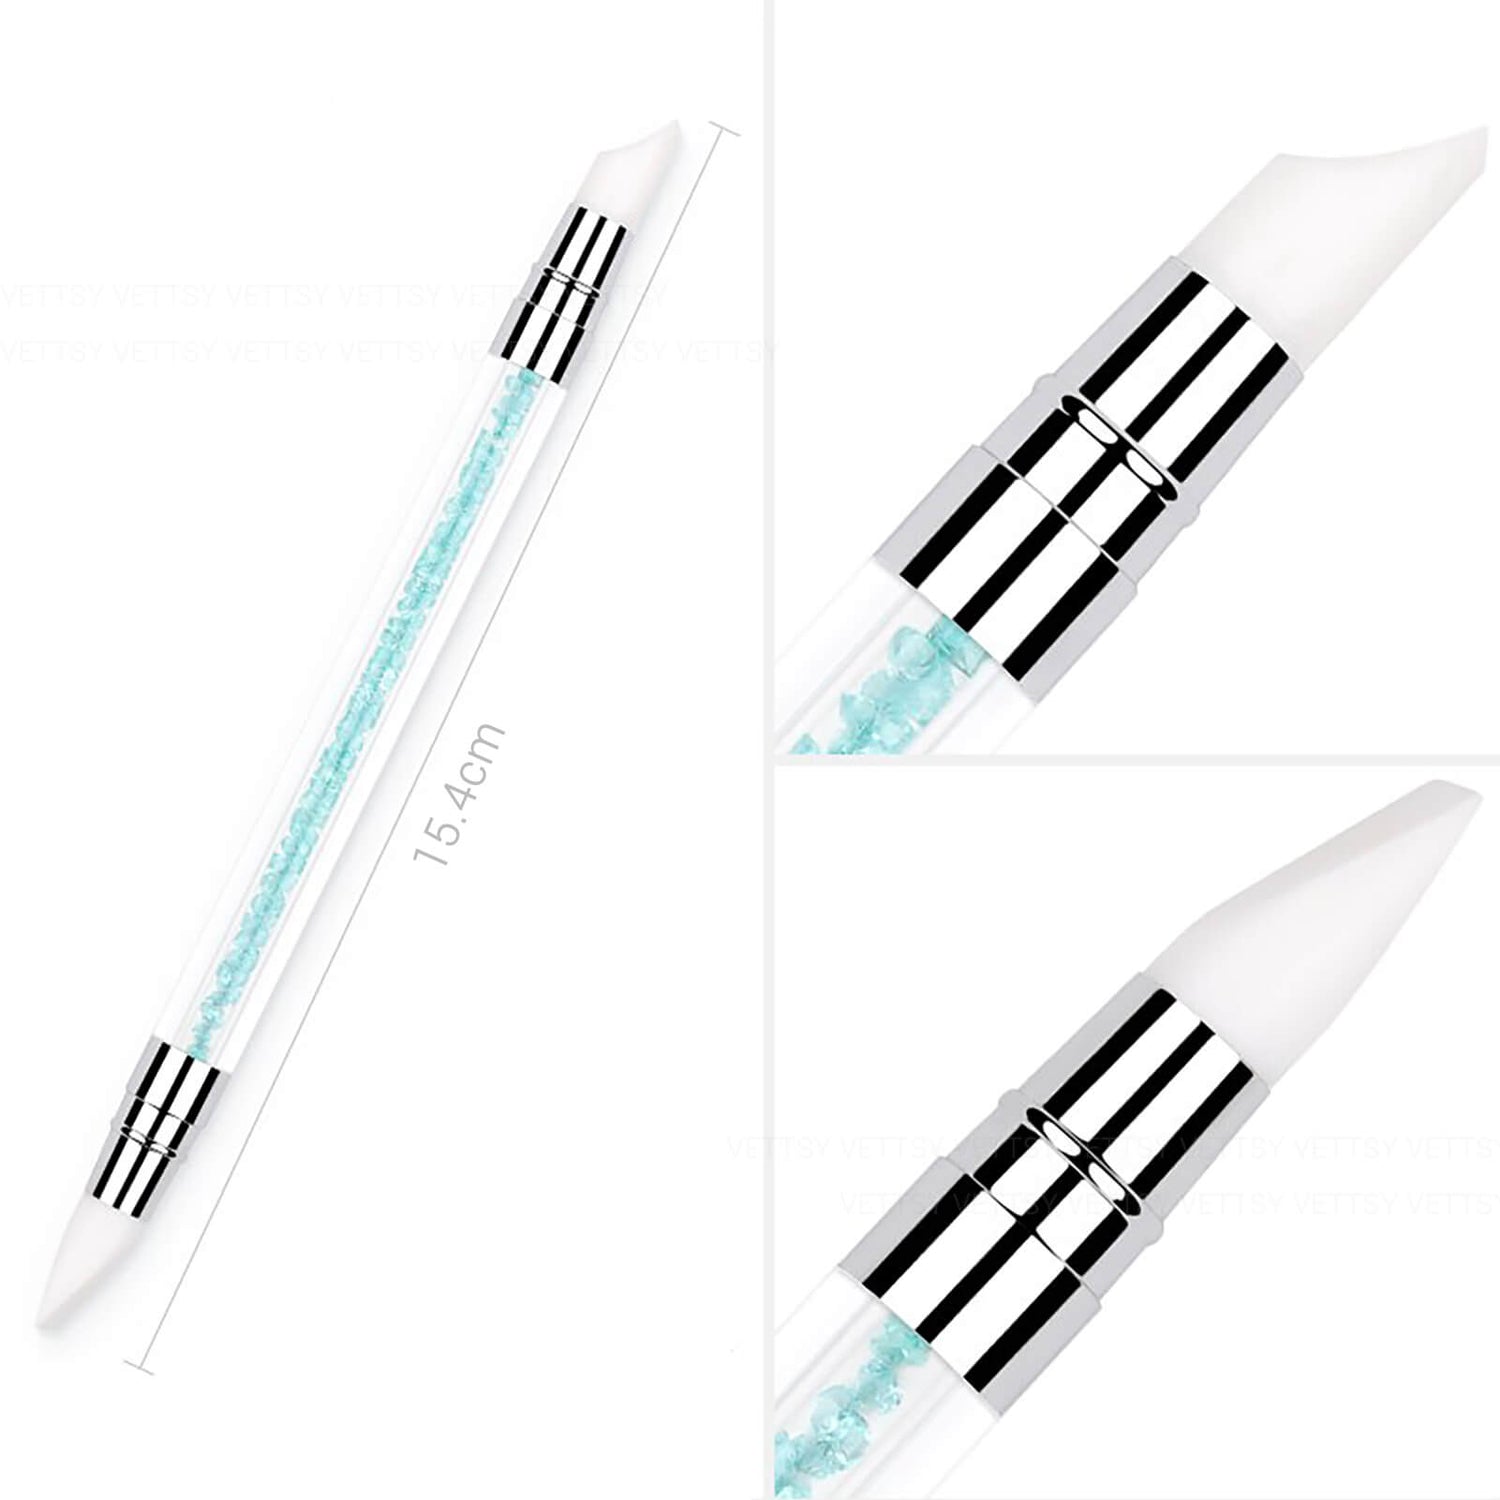 Buy Silicone Tip Nail Art Tool (4 Pack), Shipping Worldwide